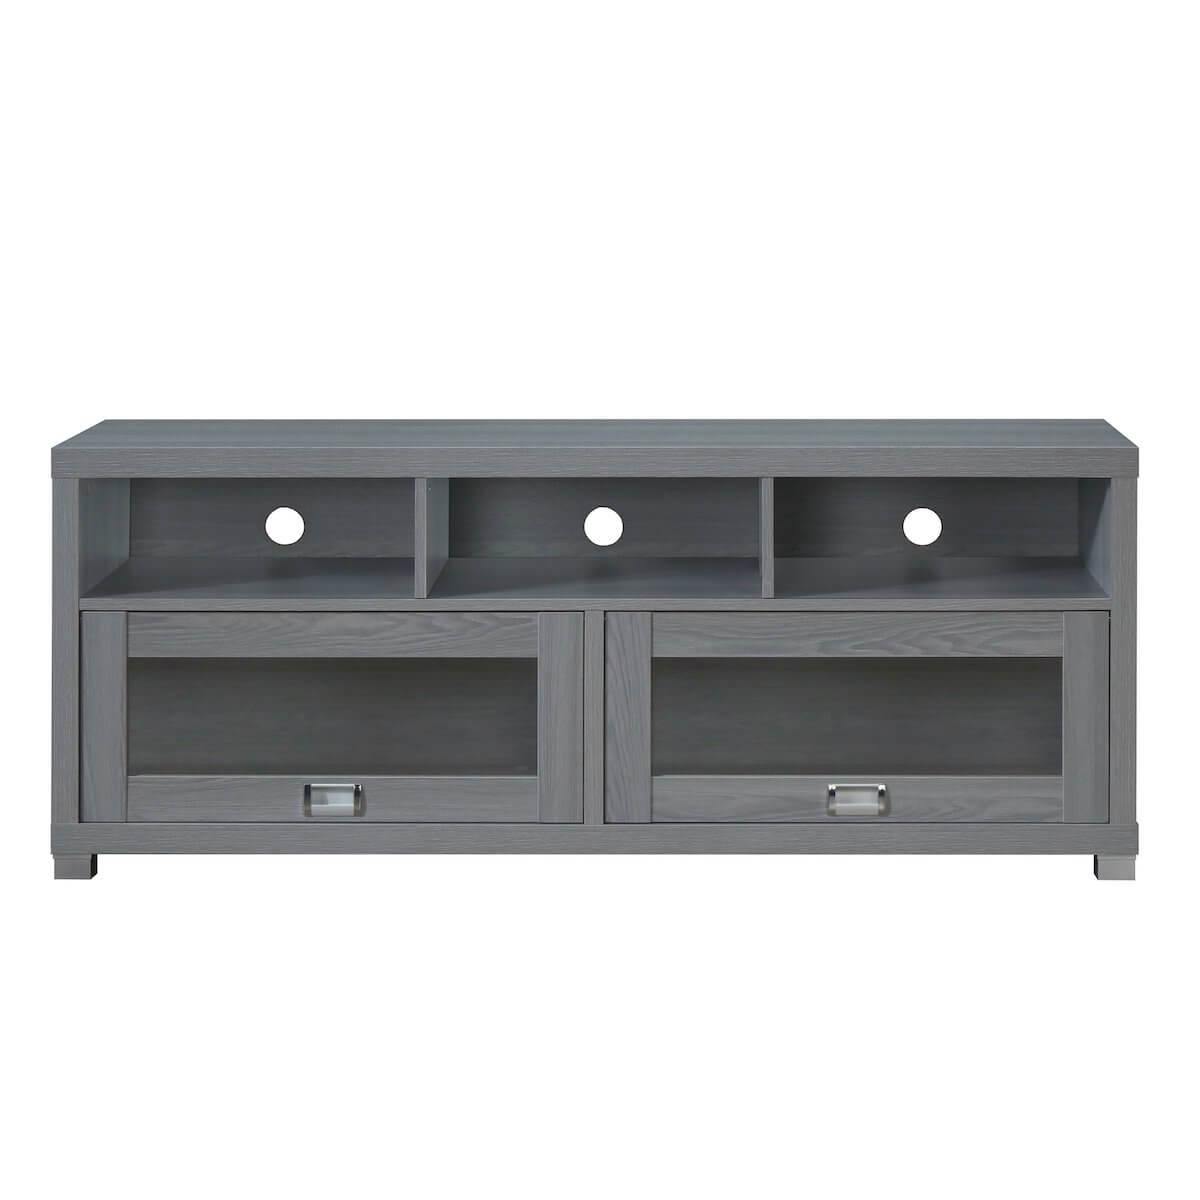 Techni Mobili Gray Durbin TV Stand for TVs up to 65" RTA-8850-GRY